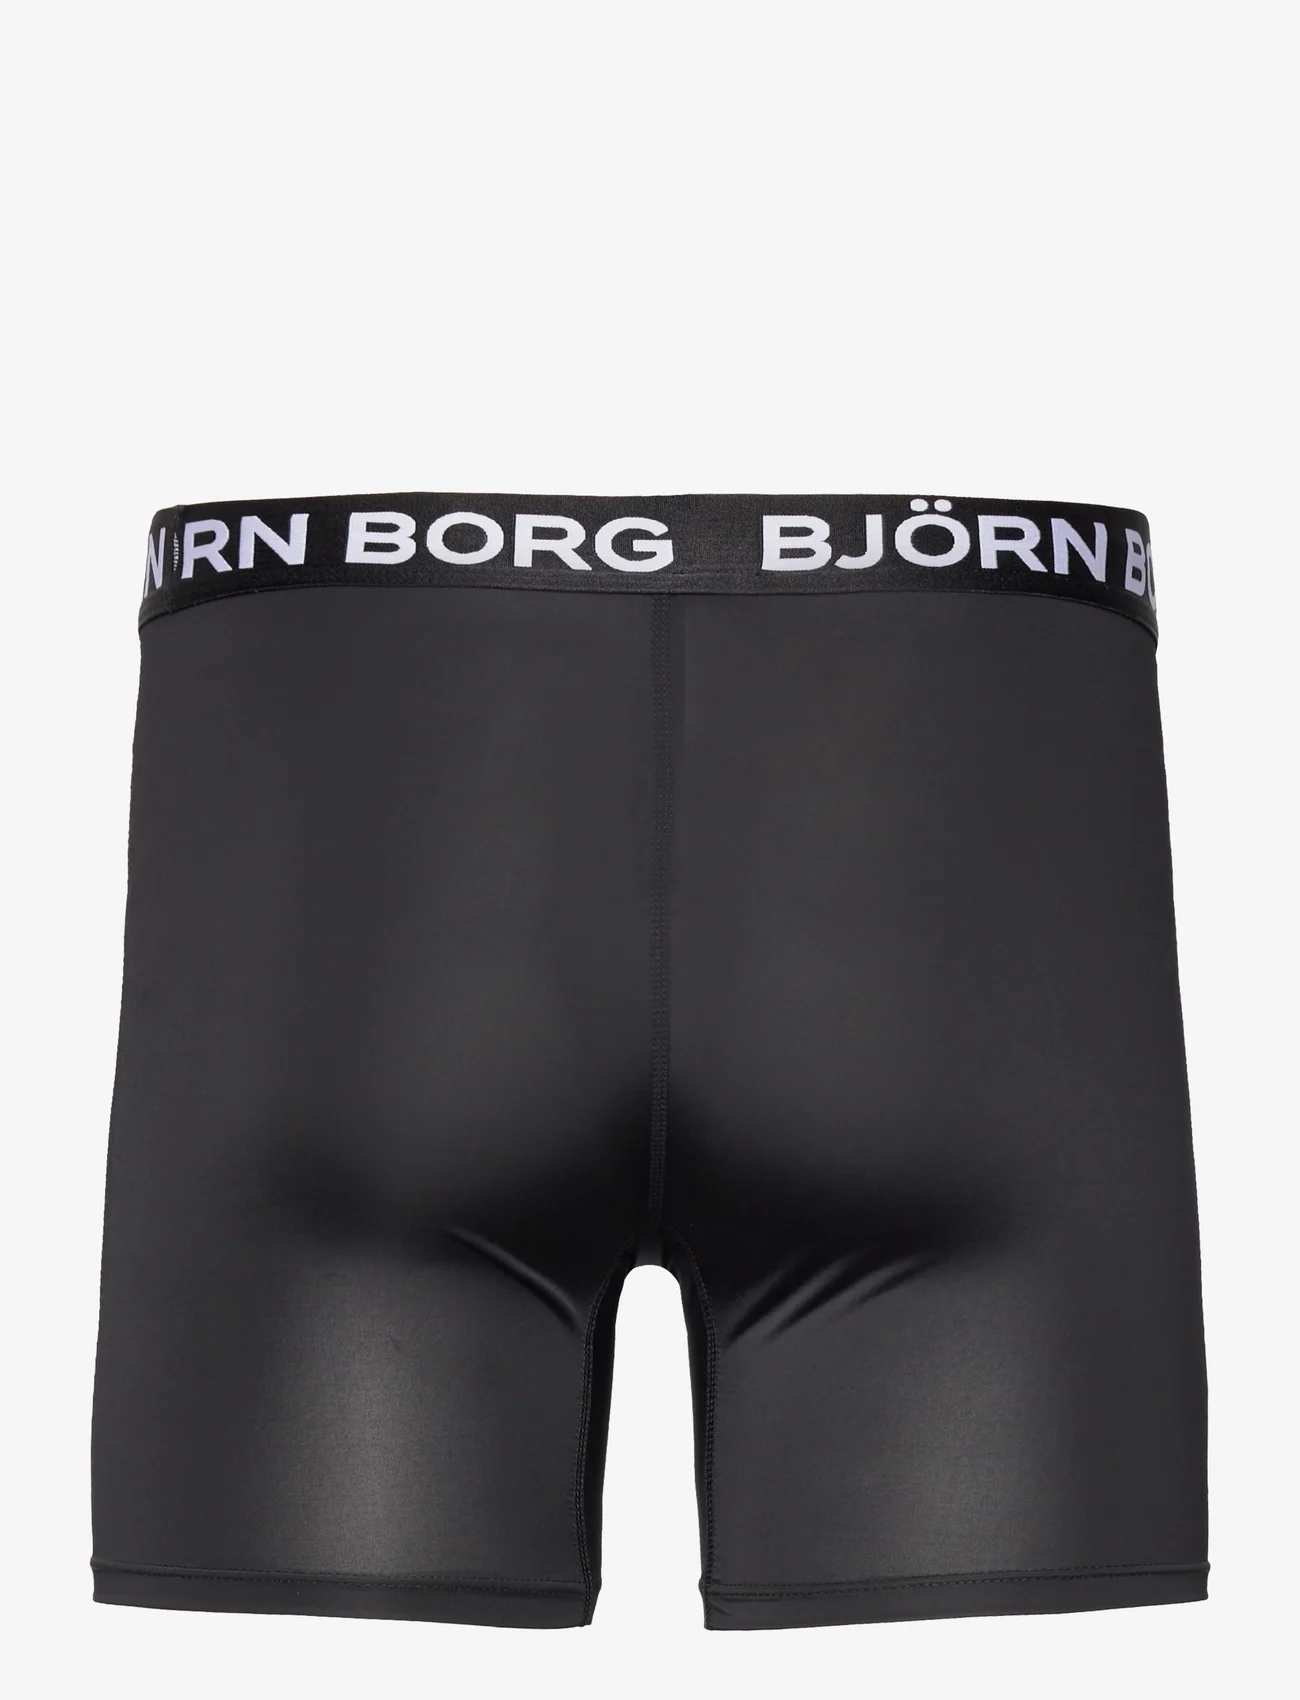 Björn Borg - PERFORMANCE BOXER 3p - nordic style - multipack 2 - 5